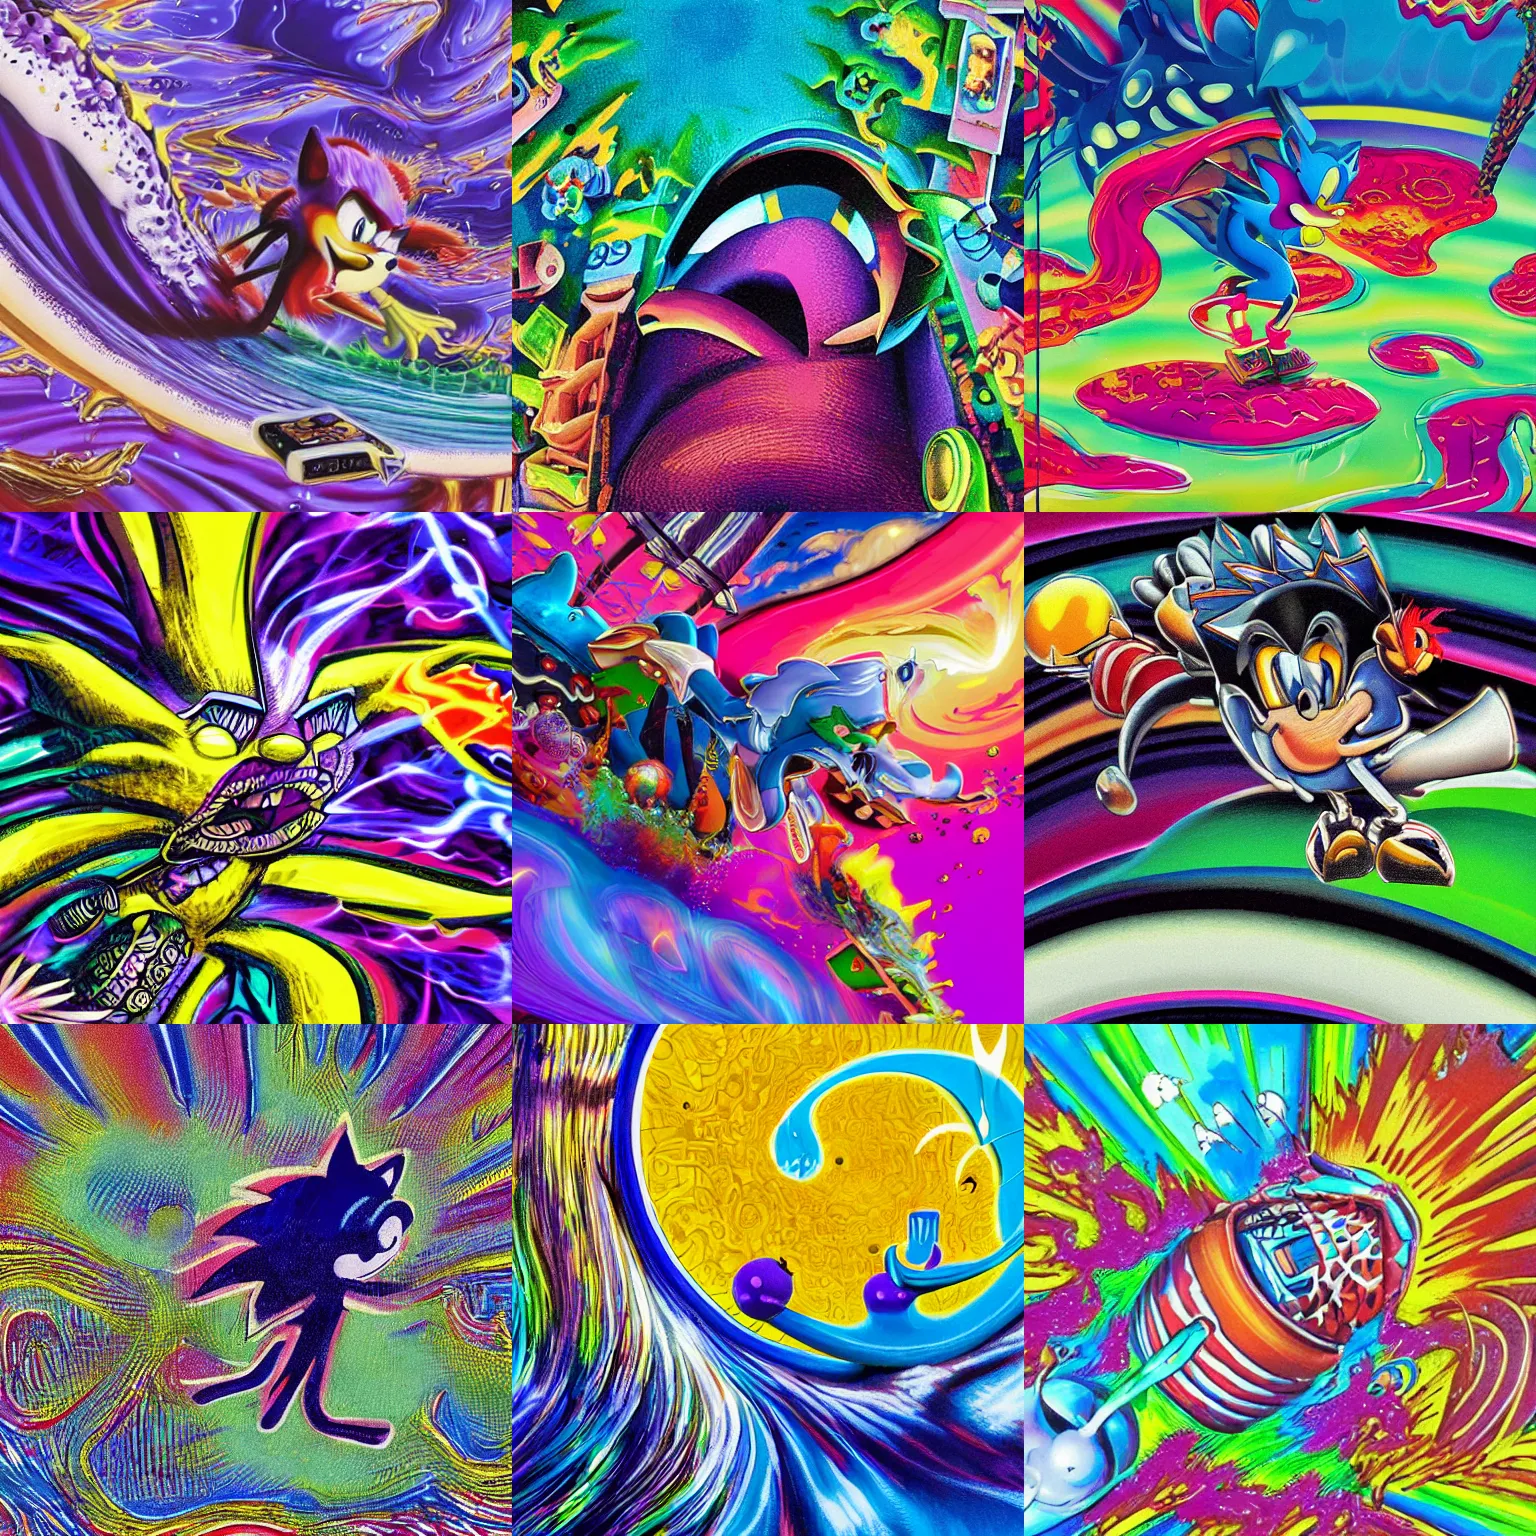 Prompt: closeup of surreal, sharp, detailed professional, high quality airbrush art MGMT album cover of a liquid dissolving LSD DMT sonic the hedgehog surfing through cyberspace, purple checkerboard background, 1990s 1992 Sega Genesis video game album cover